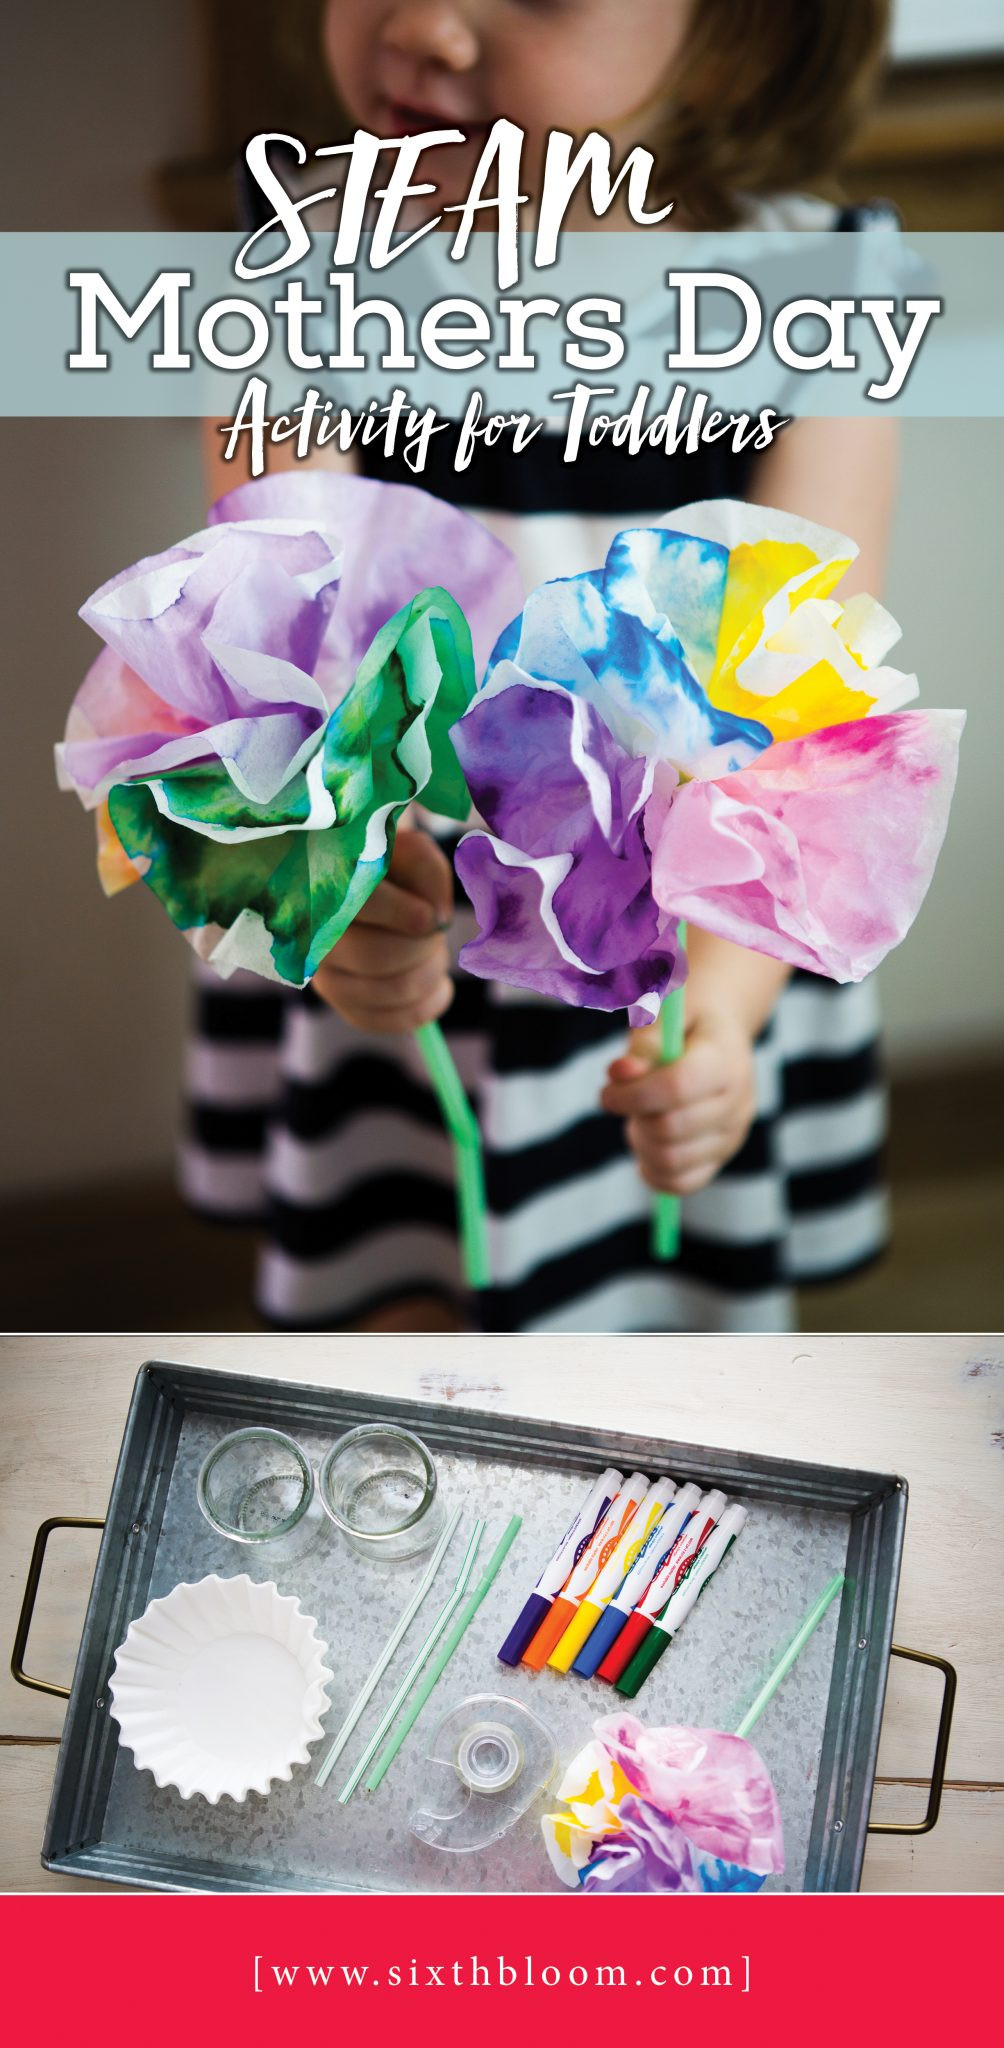 Mother'S Day Gift Ideas For Toddlers
 Mothers Day STEAM Activity for Toddlers Sixth Bloom